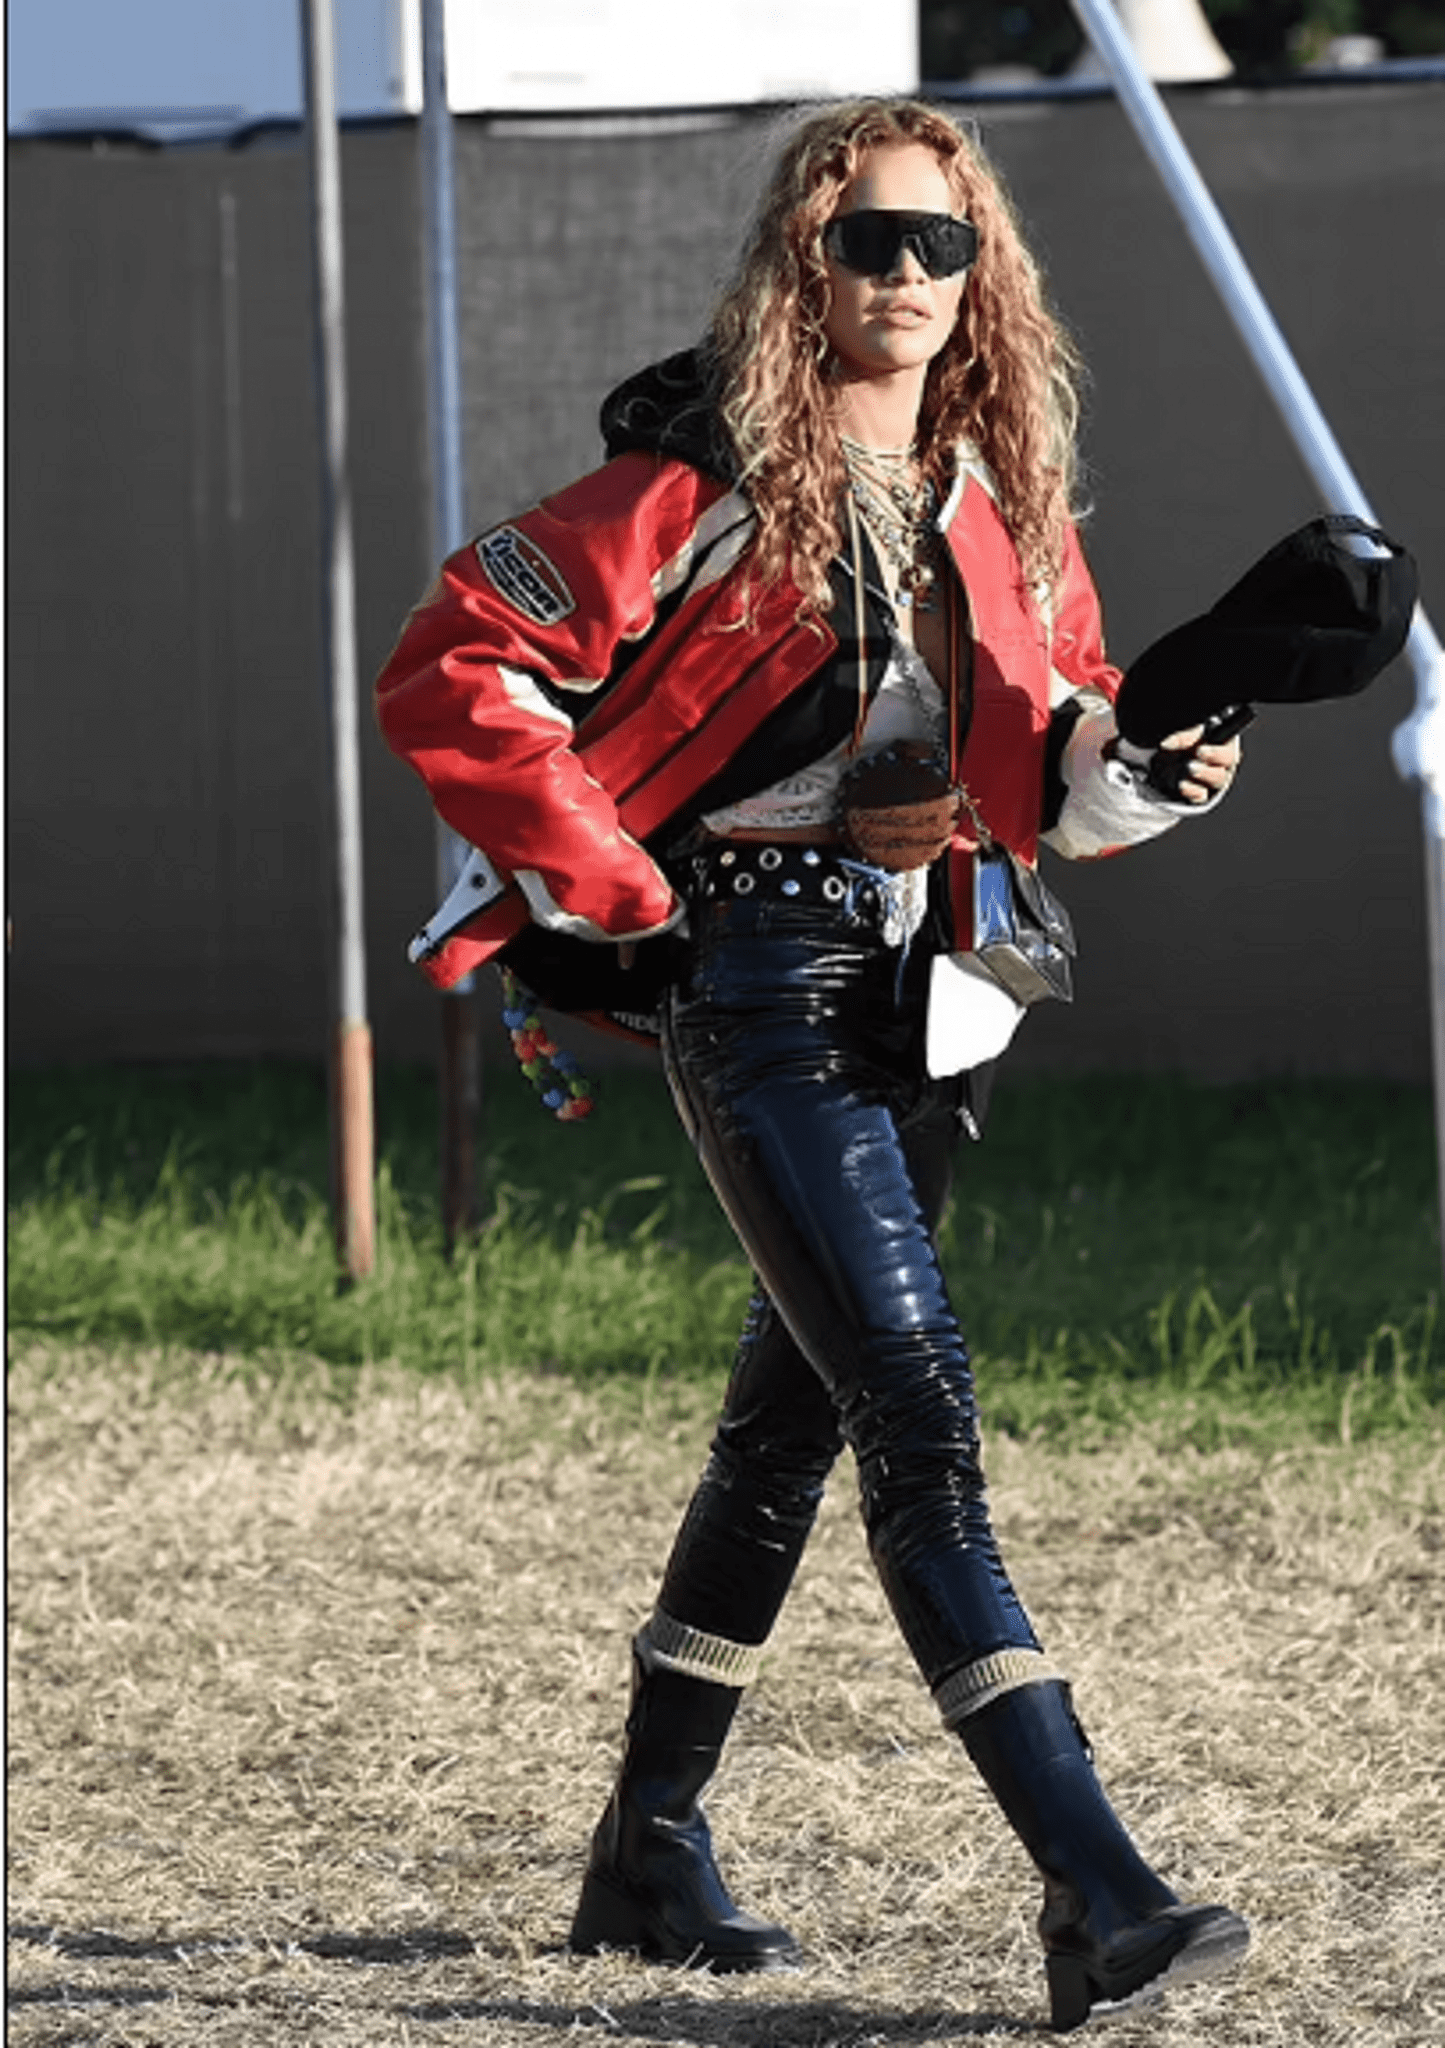 rita-ora-was-not-timid-about-walking-around-the-glastonbury-festival-without-makeup-and-styling